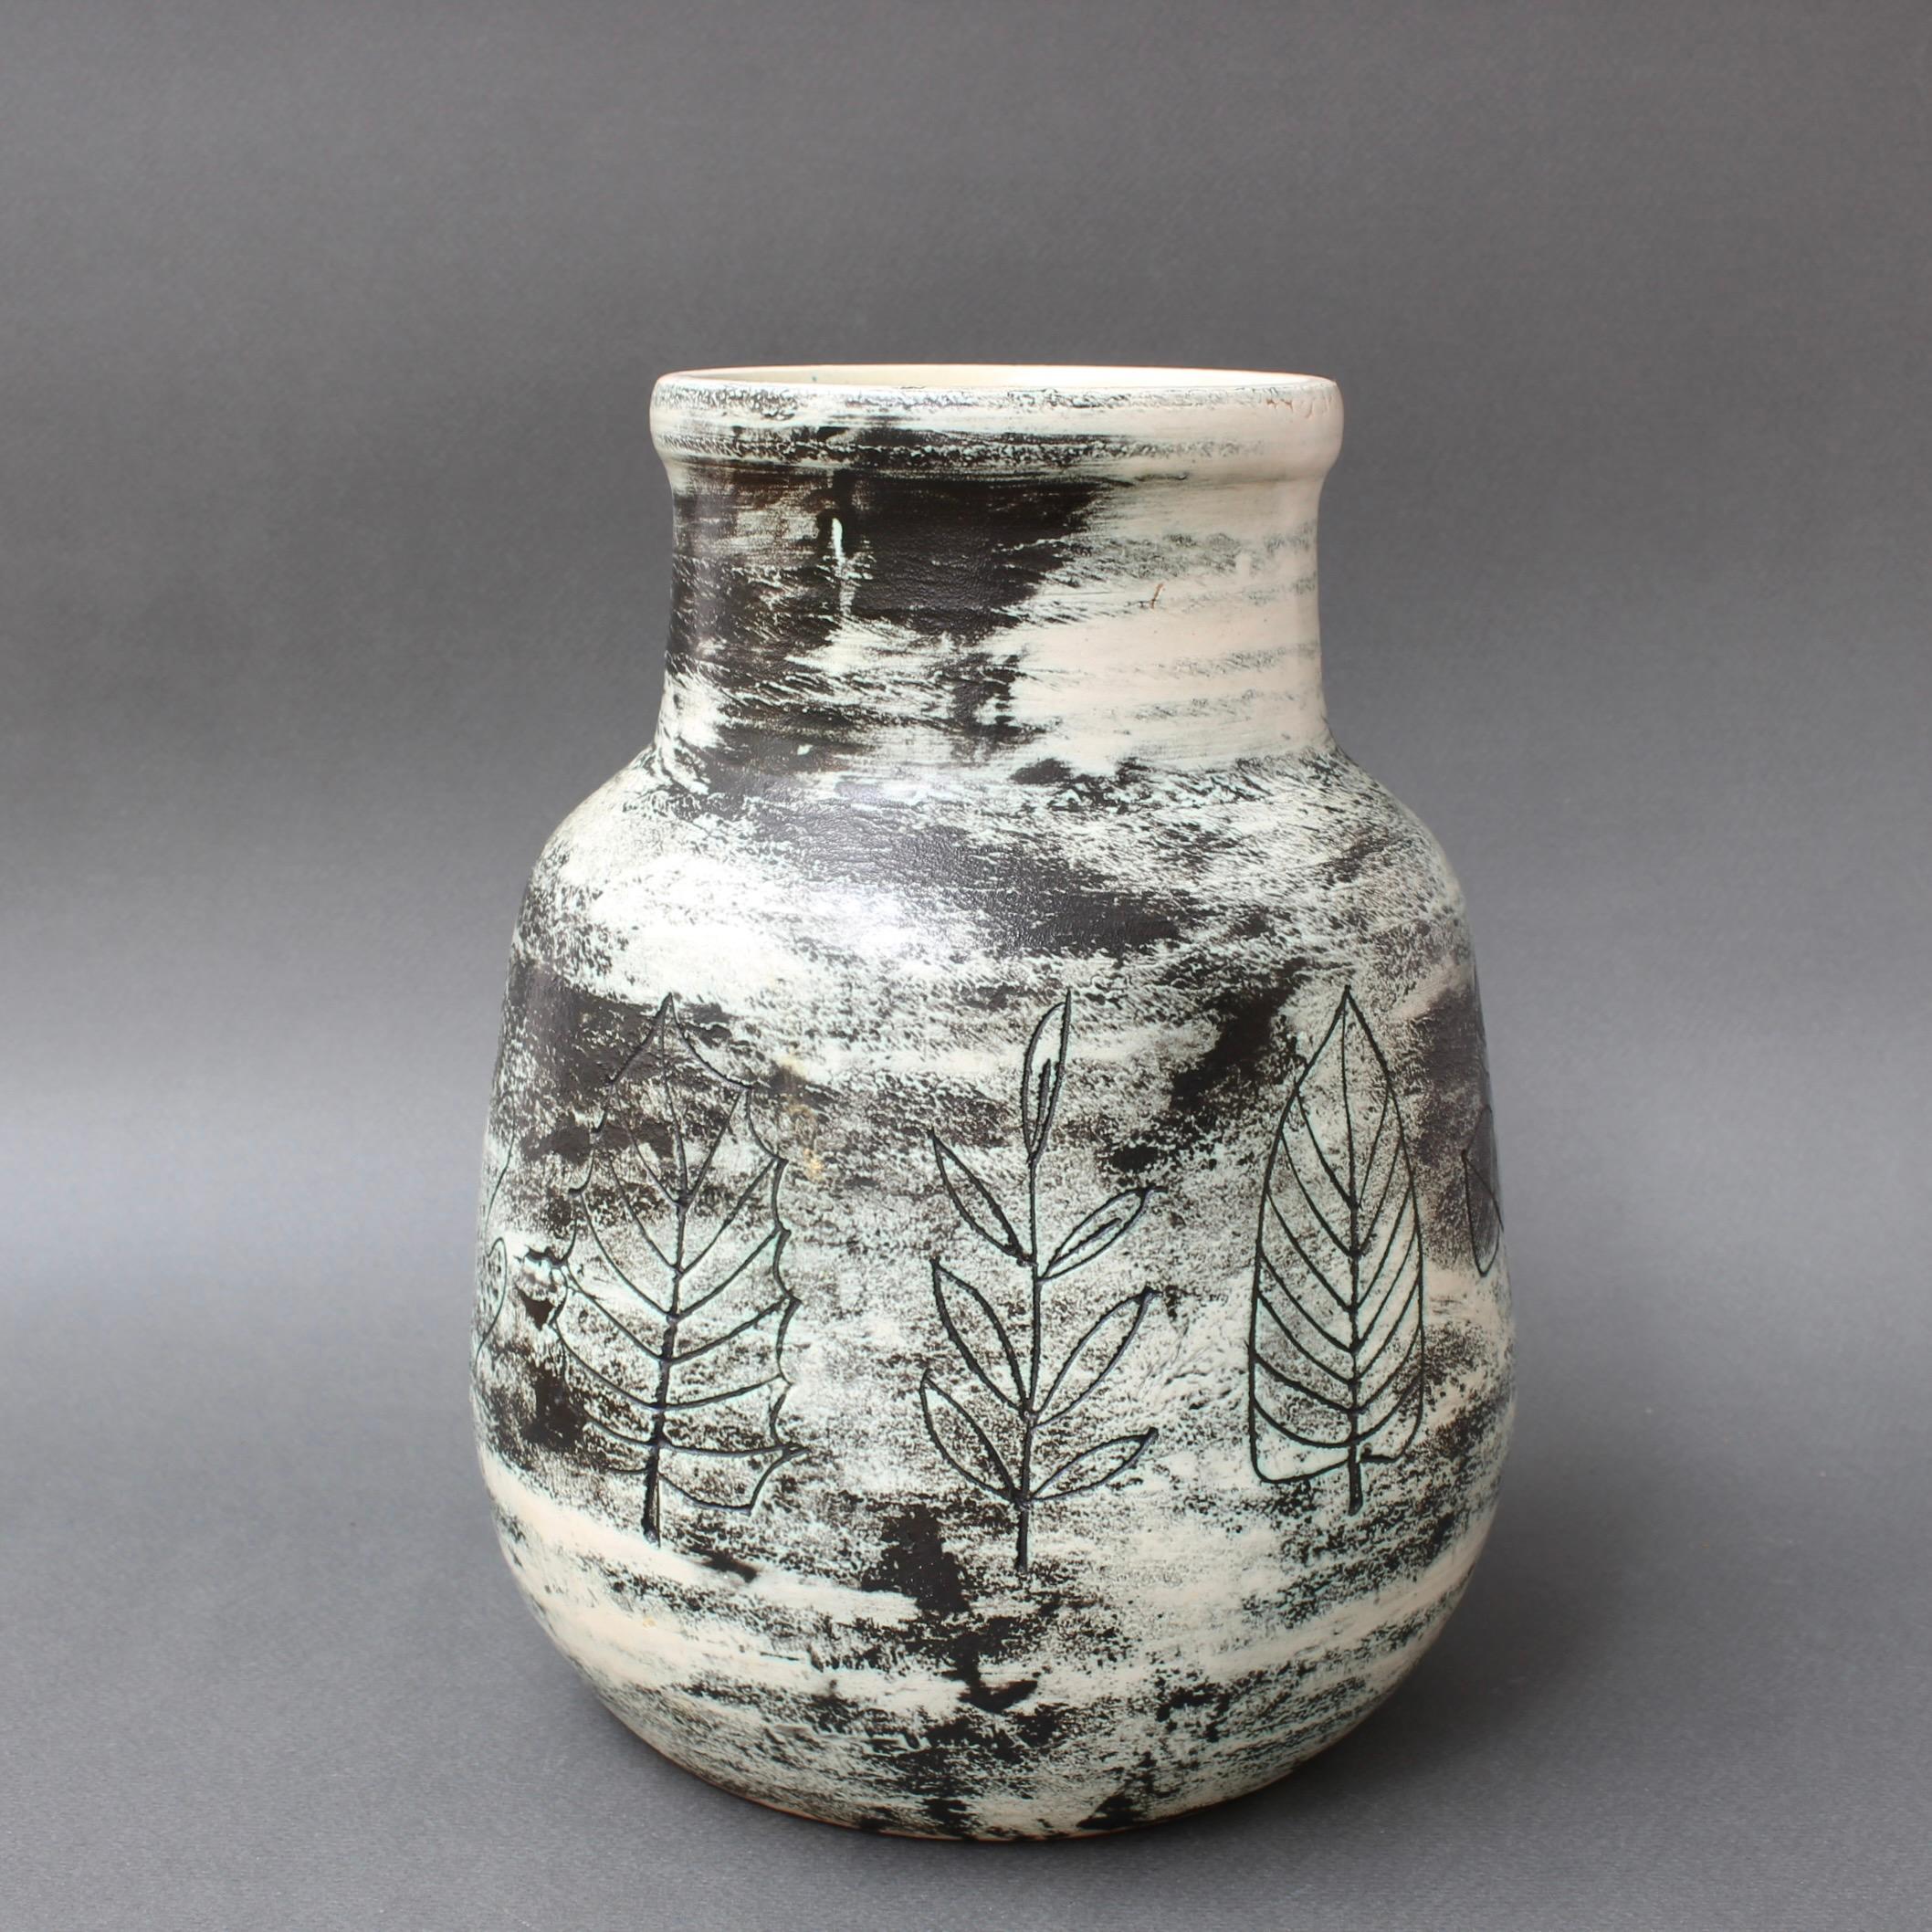 French mid-century ceramic vase by Jacques Blin (circa 1950s). A serious yet delightful piece created using Blin's trademark misty glaze with lovely decorations of plant life such as leaves, branches and stems. The spherical central portion houses